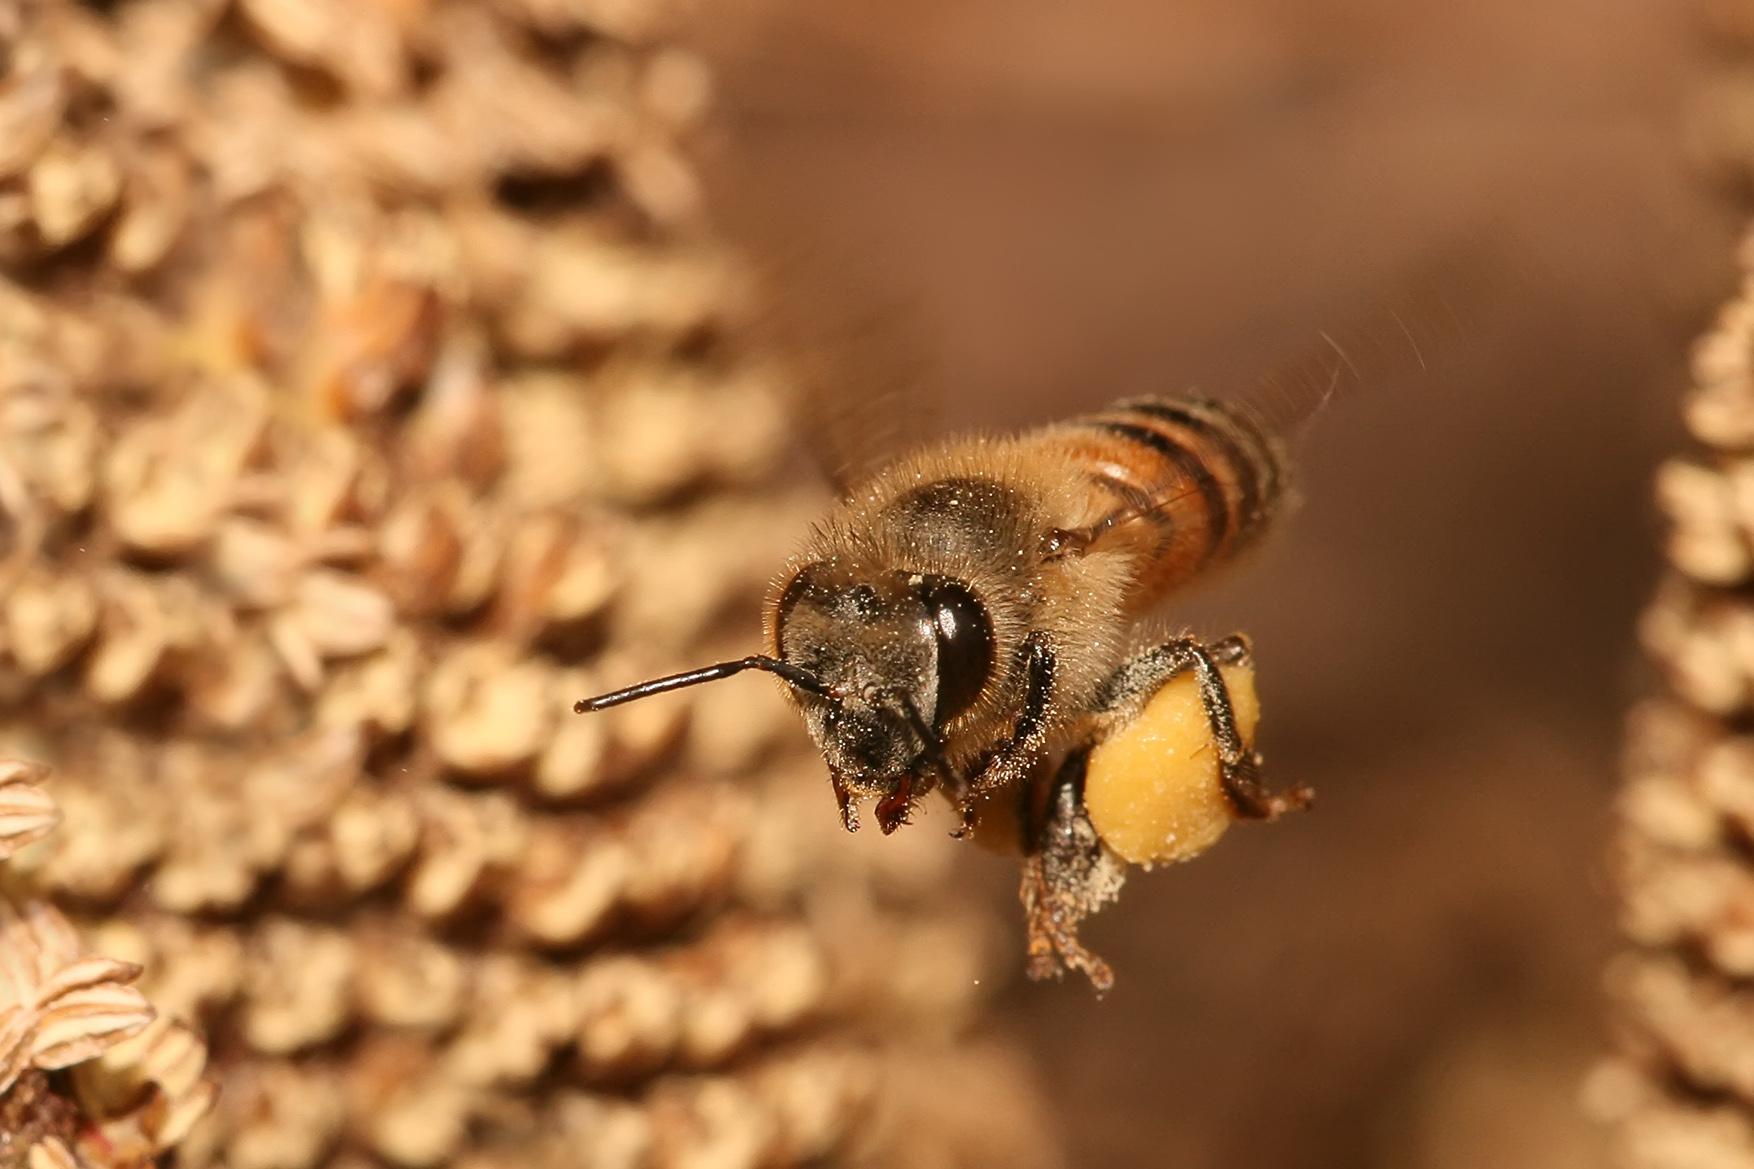 A European honey bee carries pollen back to its hive.